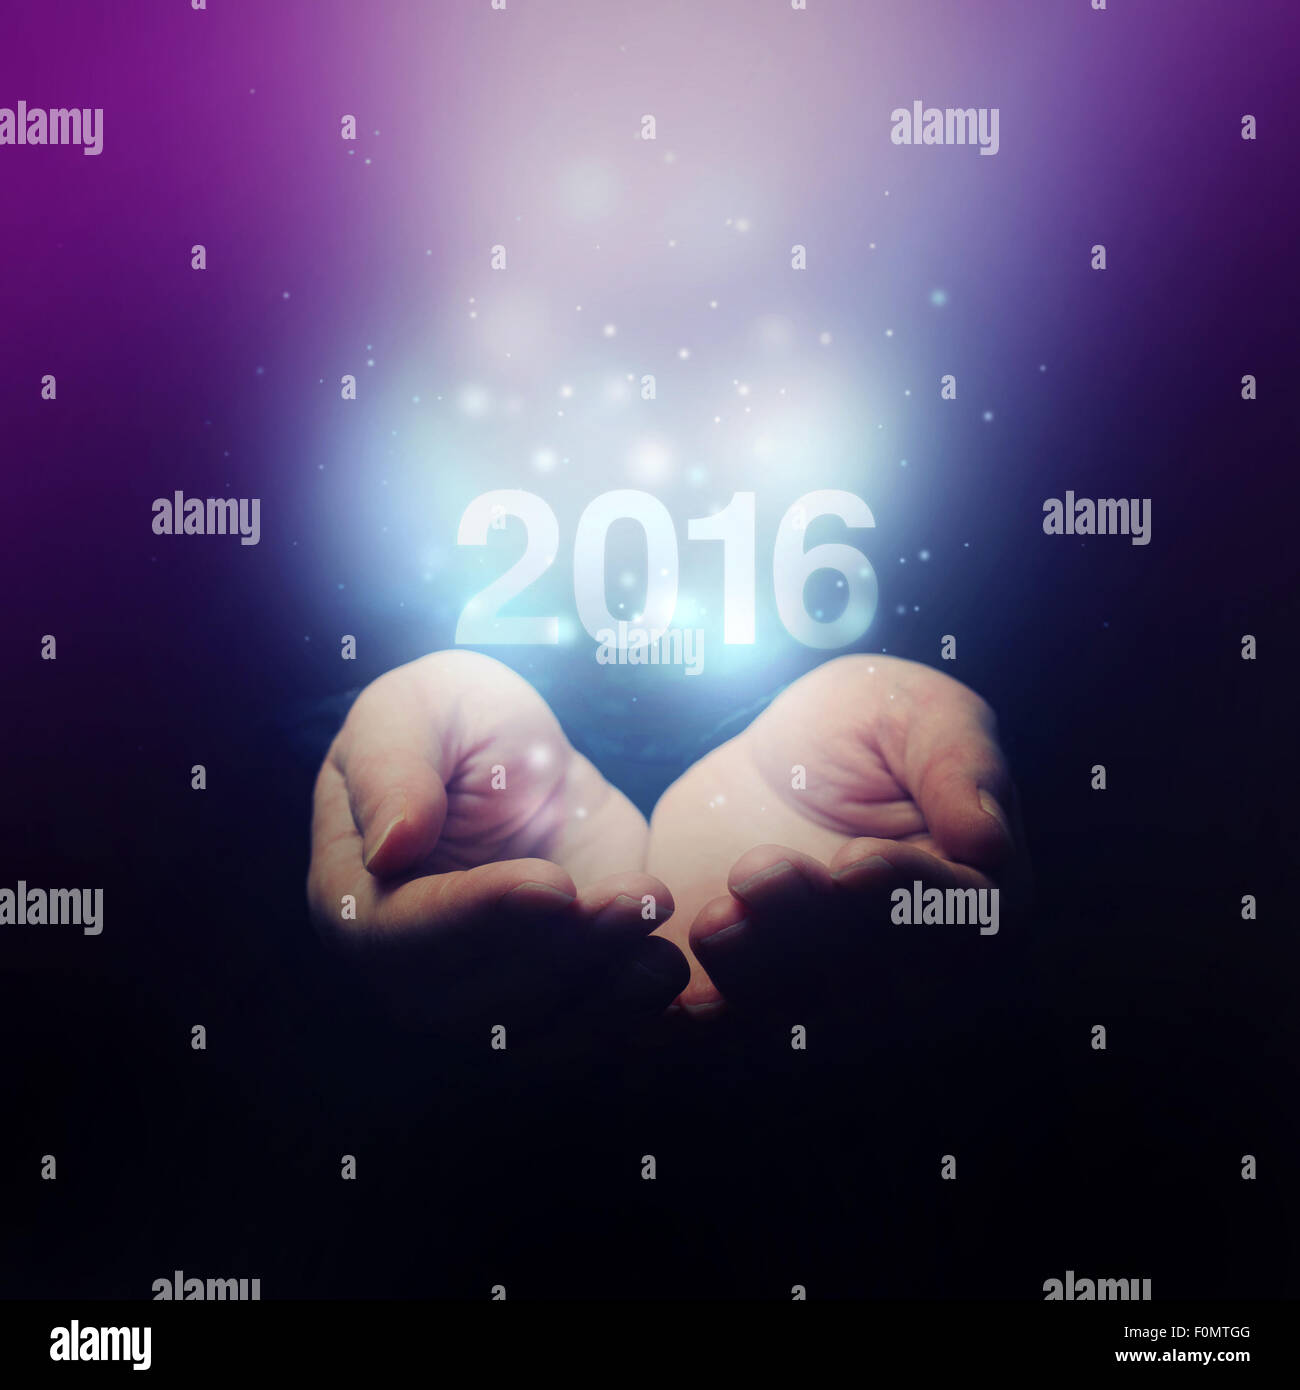 Open Hands Holding Number 2016, Happy New Year, Selective Focus on Fingers, Retro Vintage Tone Stock Photo